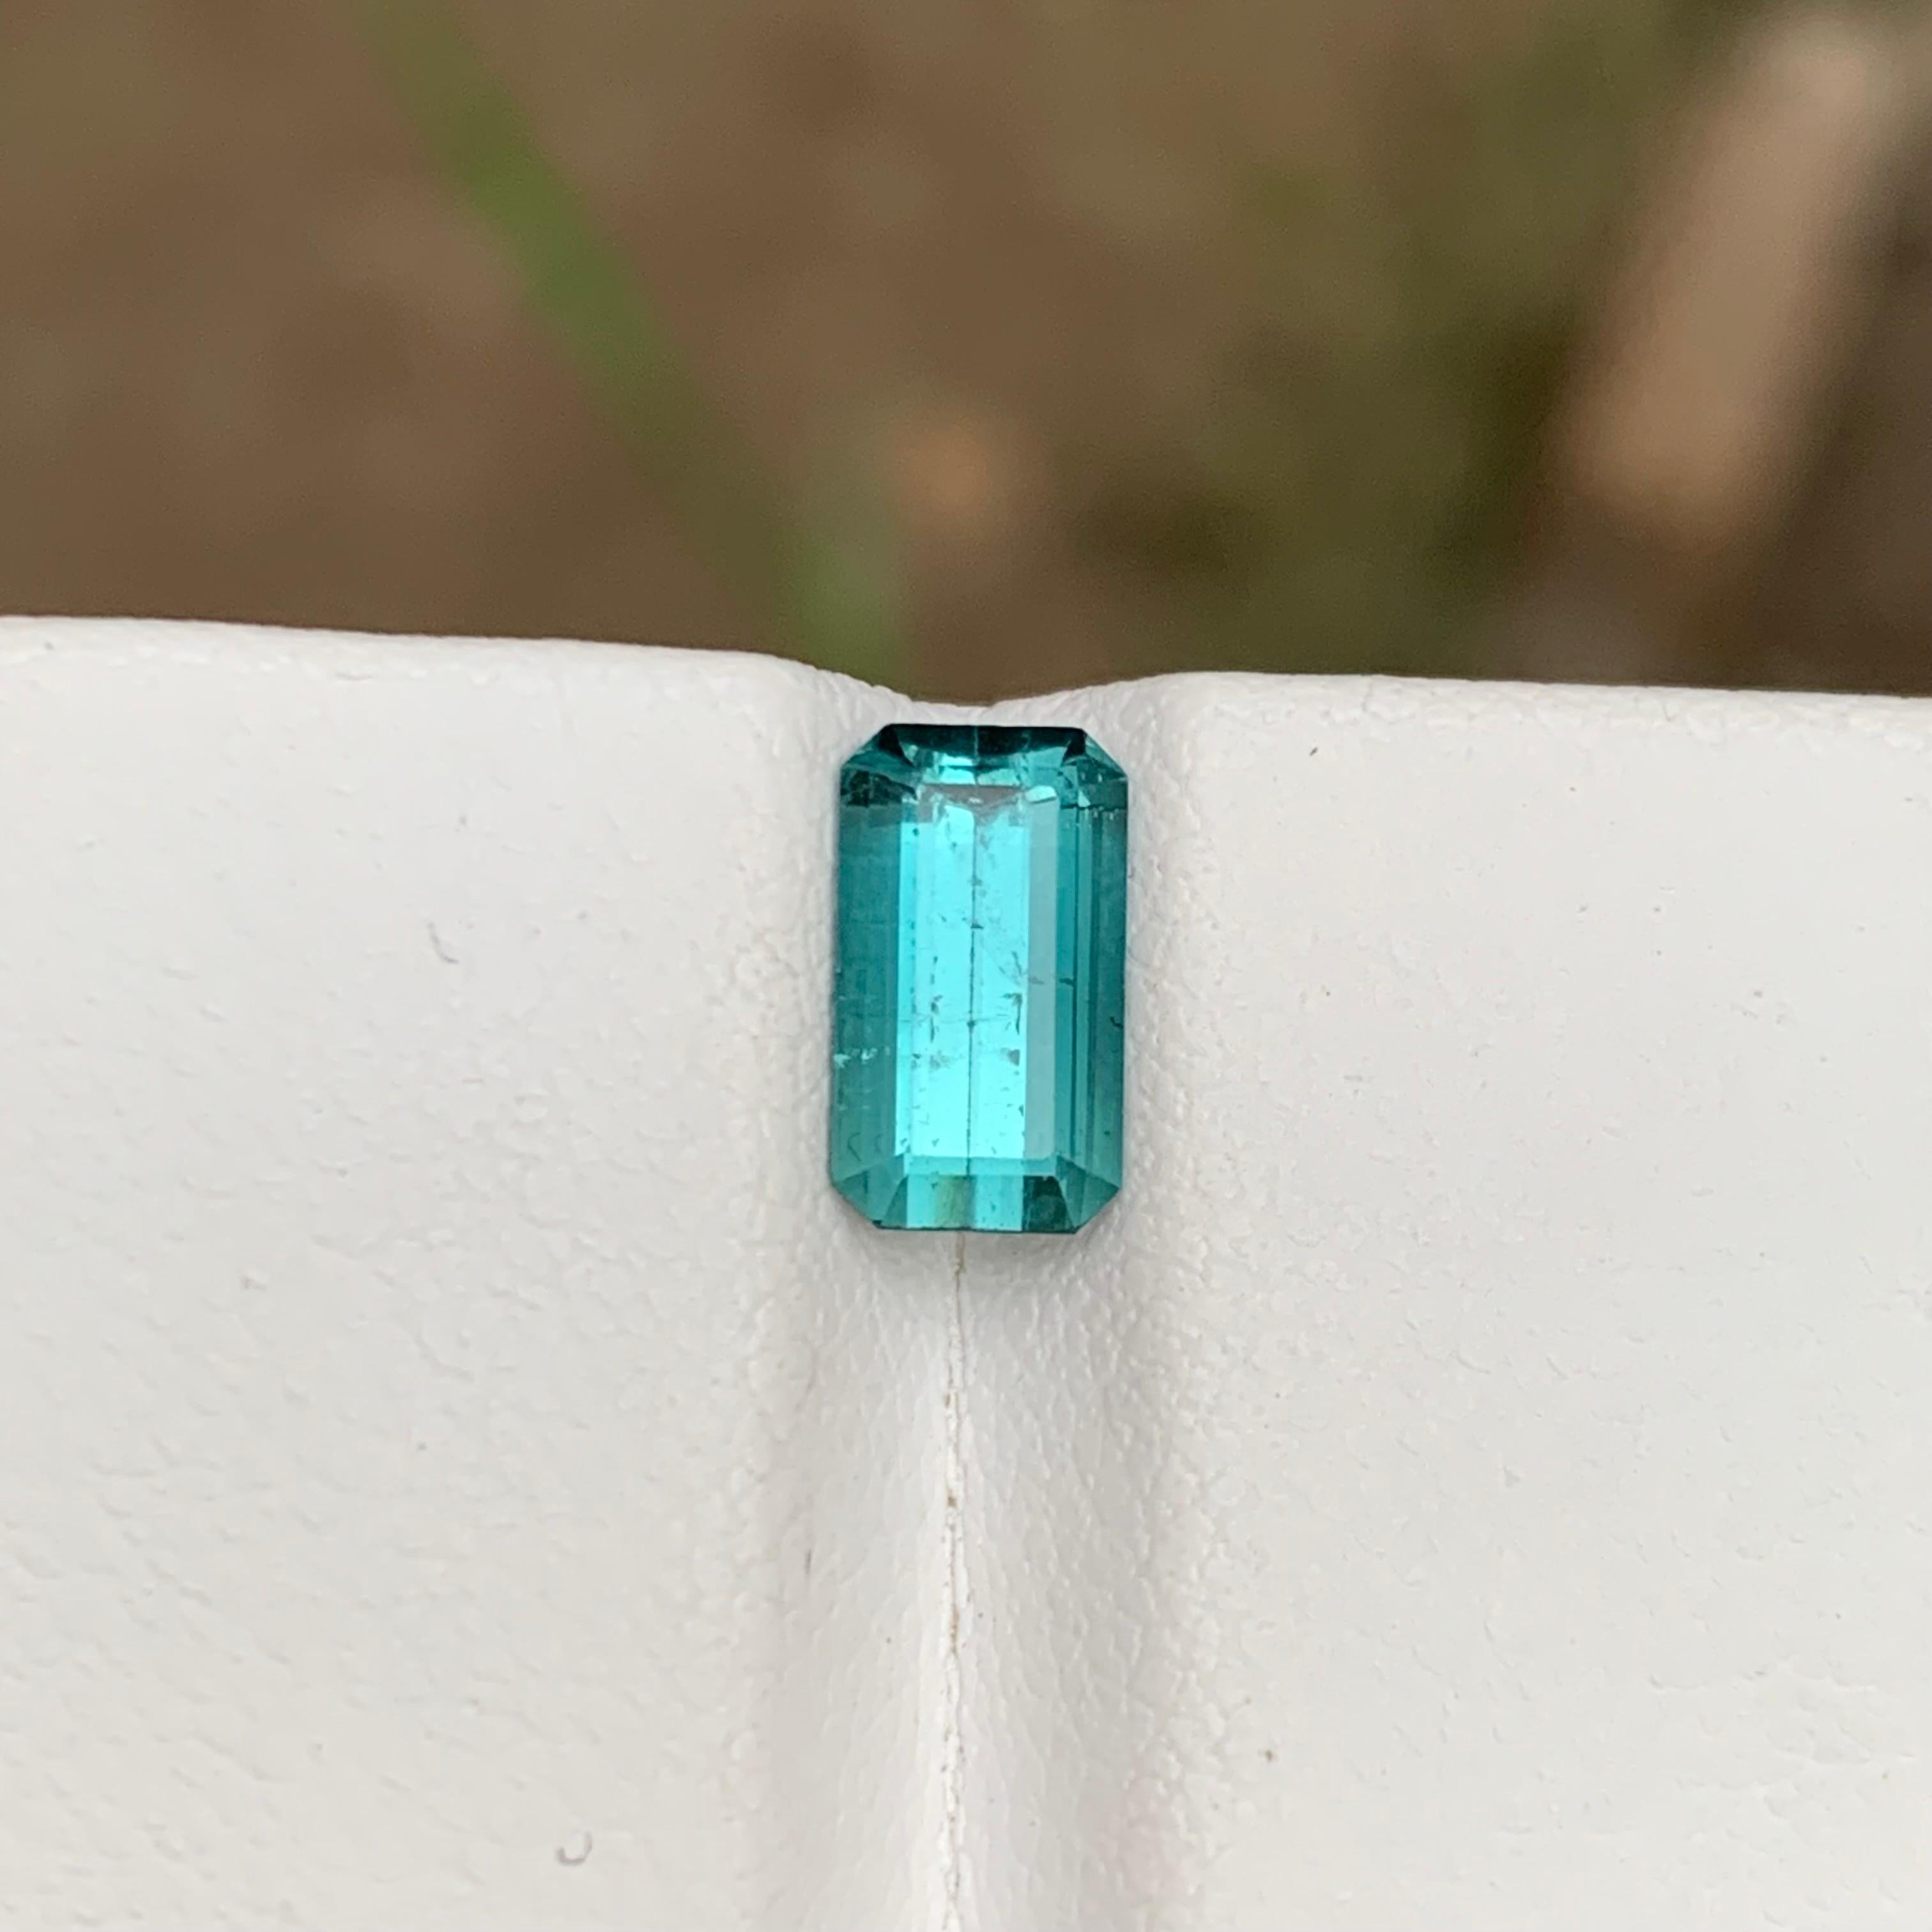 Rare Blue Natural Tourmaline Gemstone, 1.60 Ct Emerald Cut for Ring/Jewelry Set For Sale 5